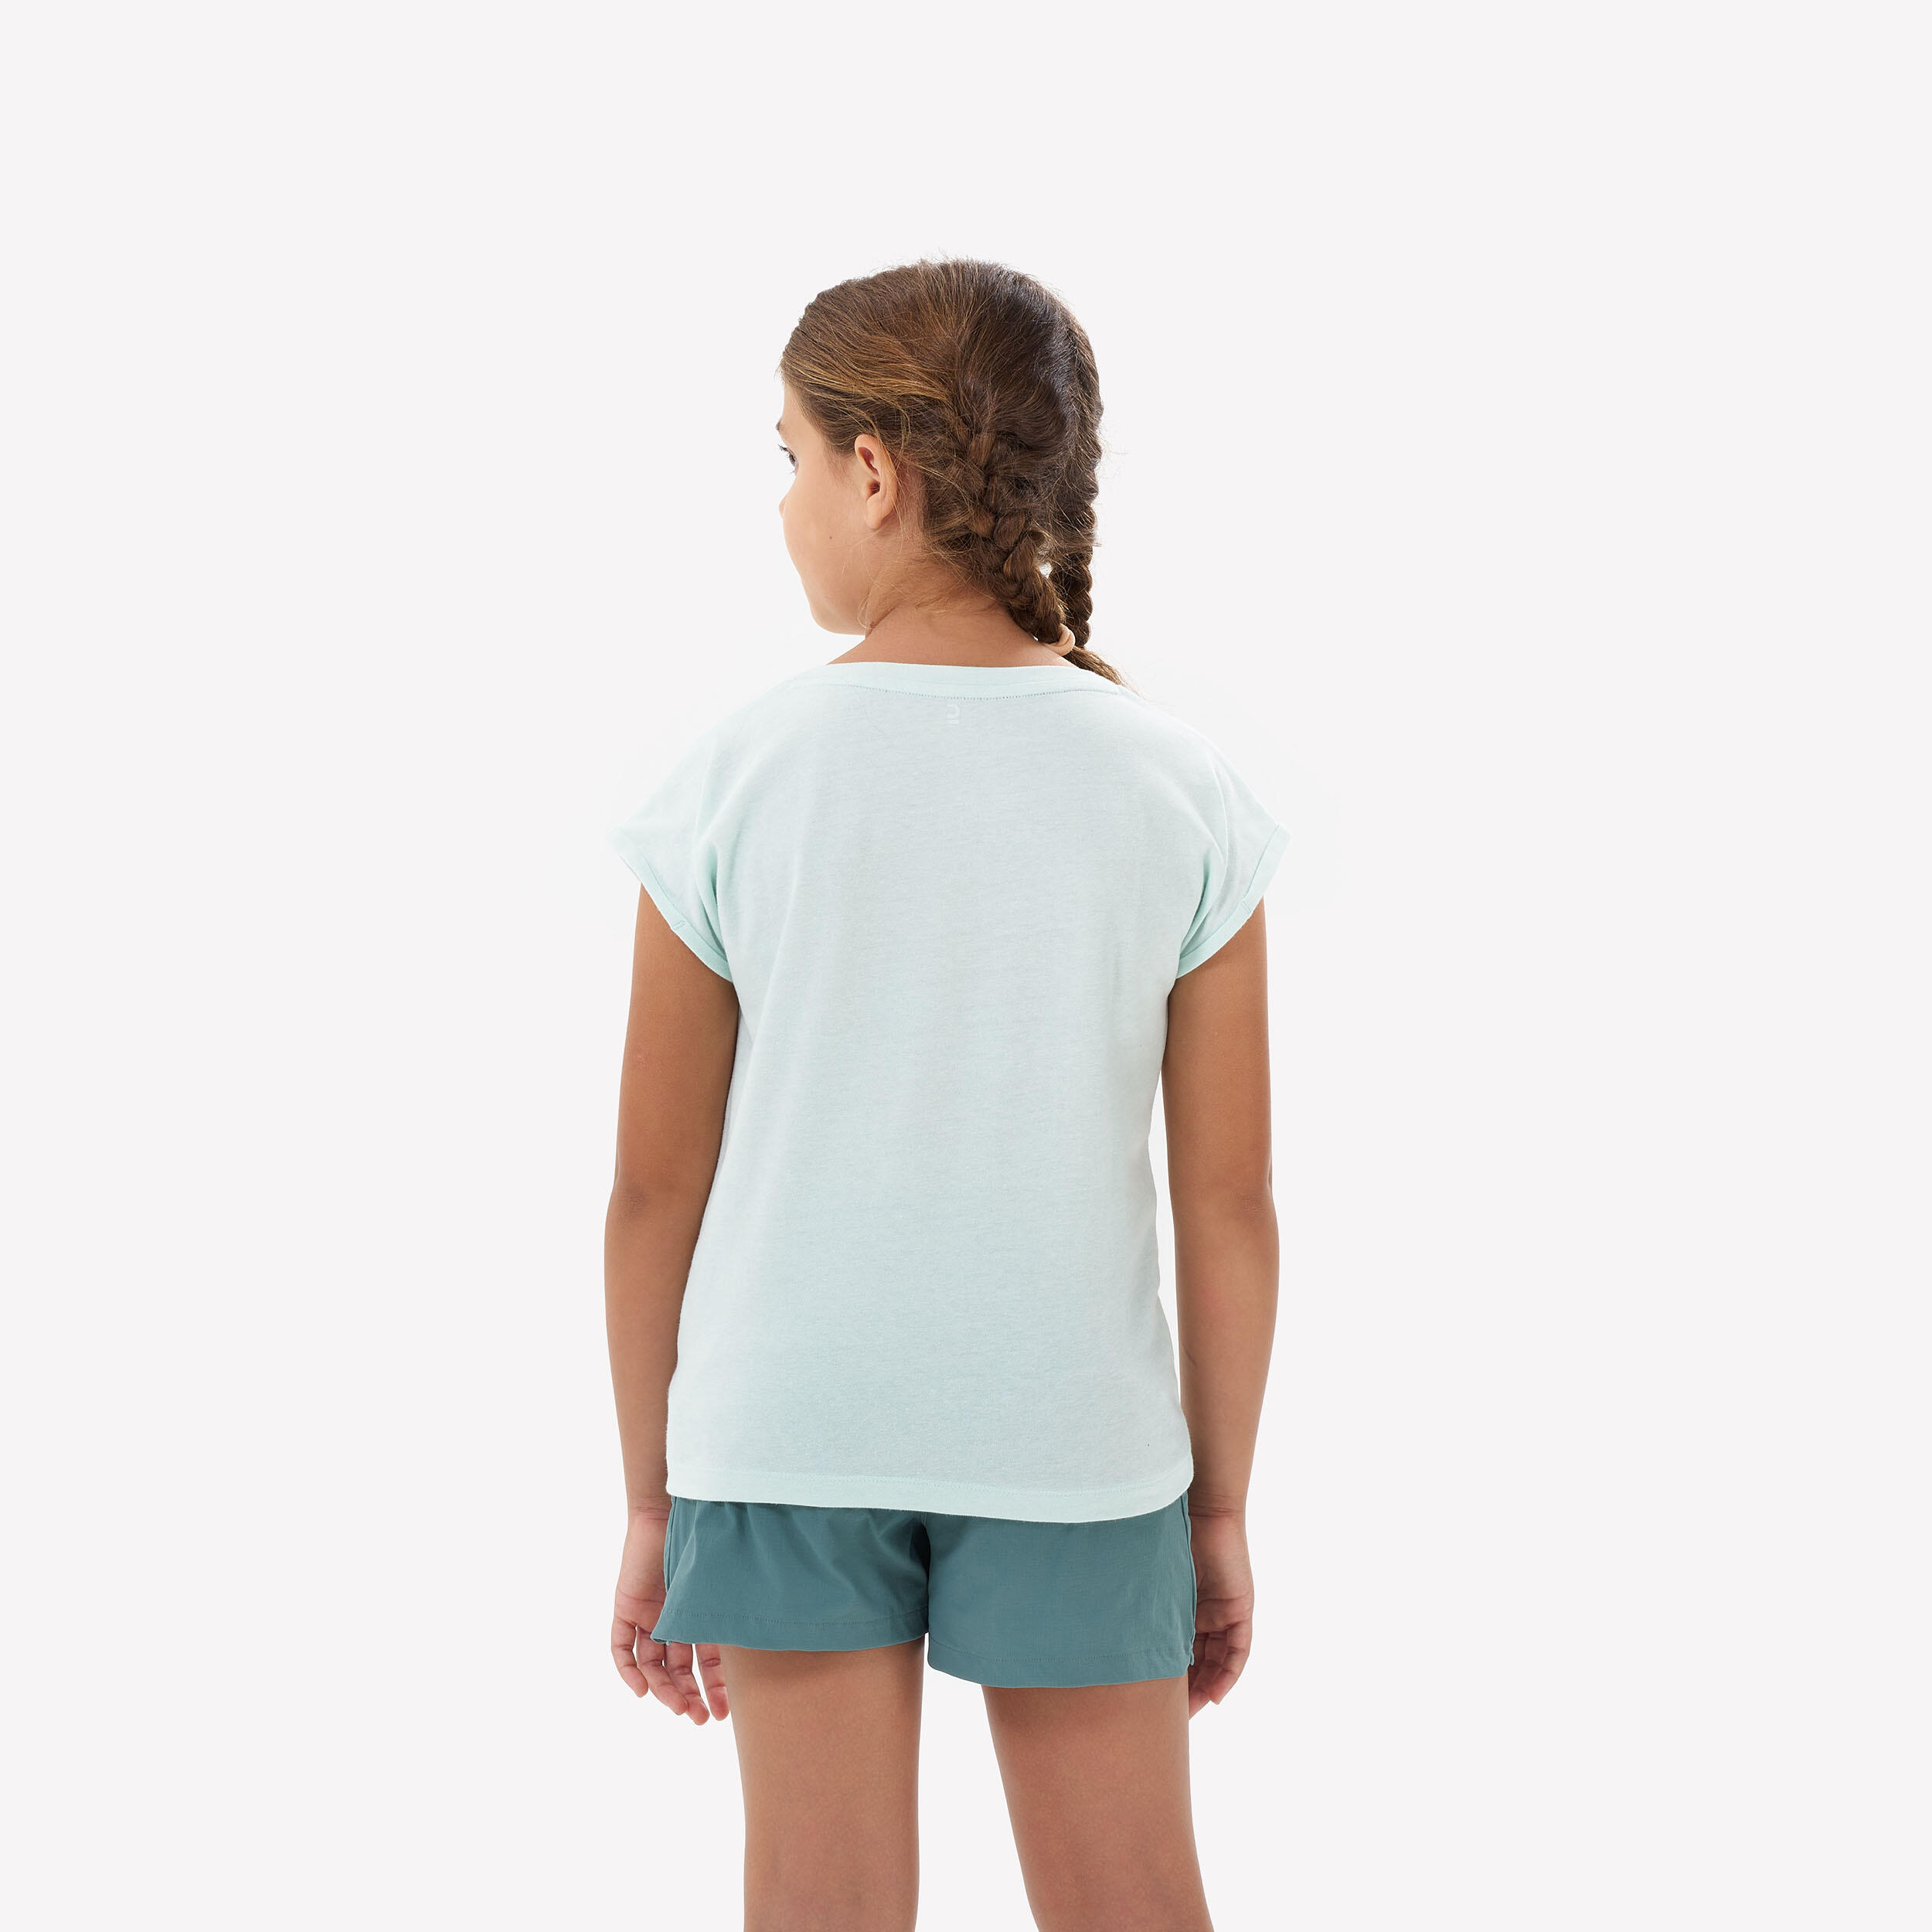 Girls’ Hiking T-Shirt - MH100 Ages 7-15 - Turquoise 4/6